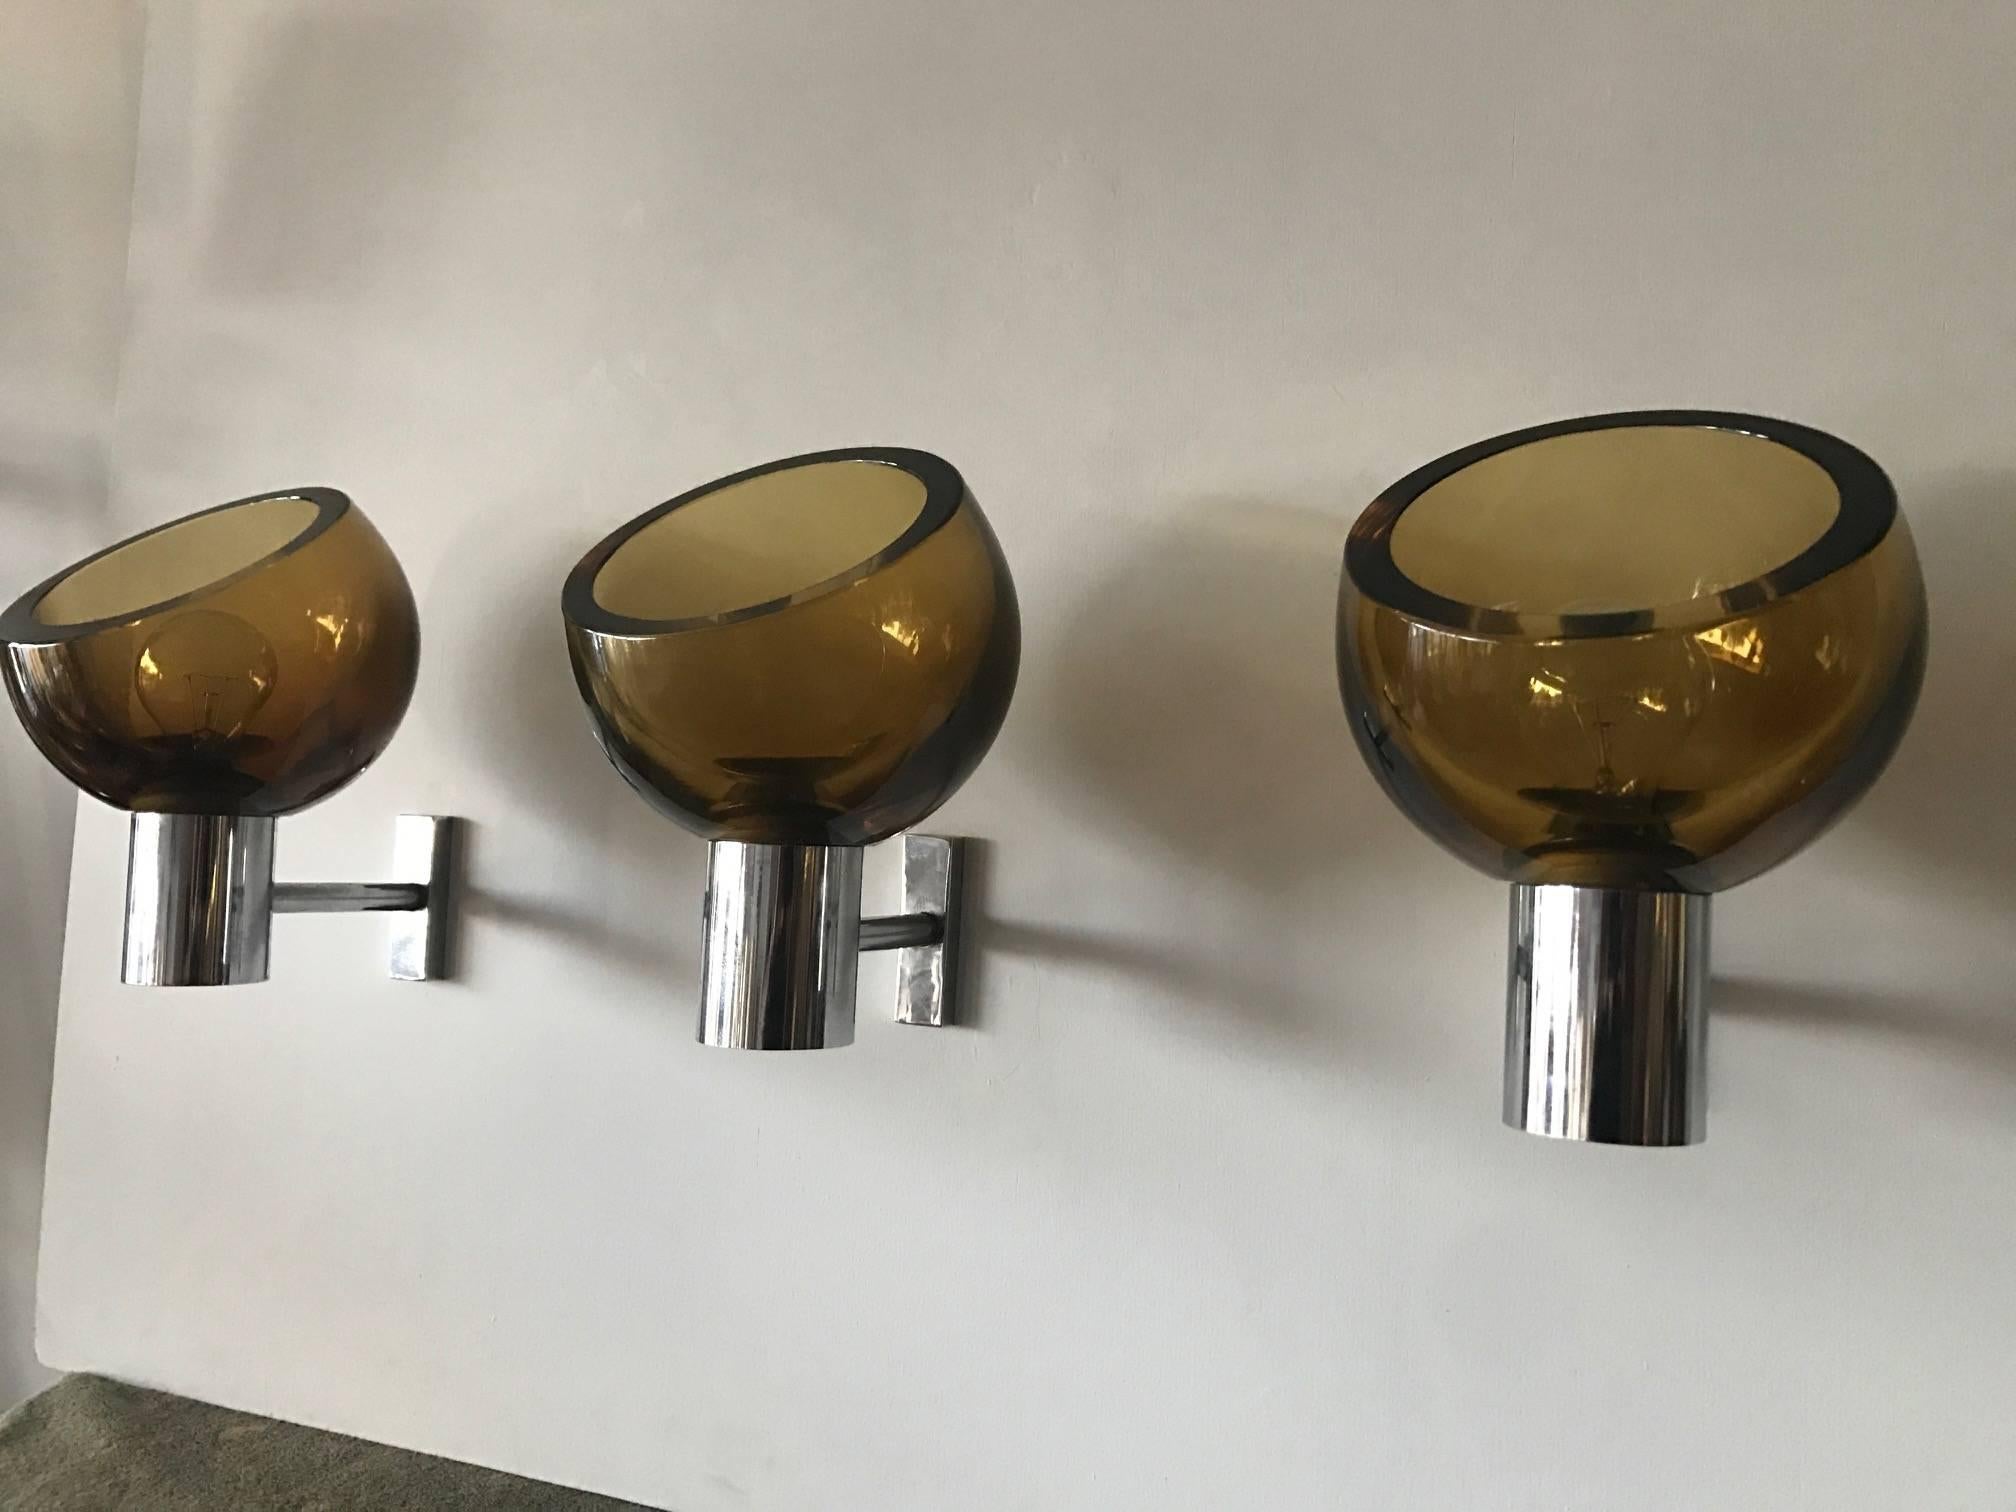 A set of three (3) sconces by Seguso, amber colored glass with chromed hardware.